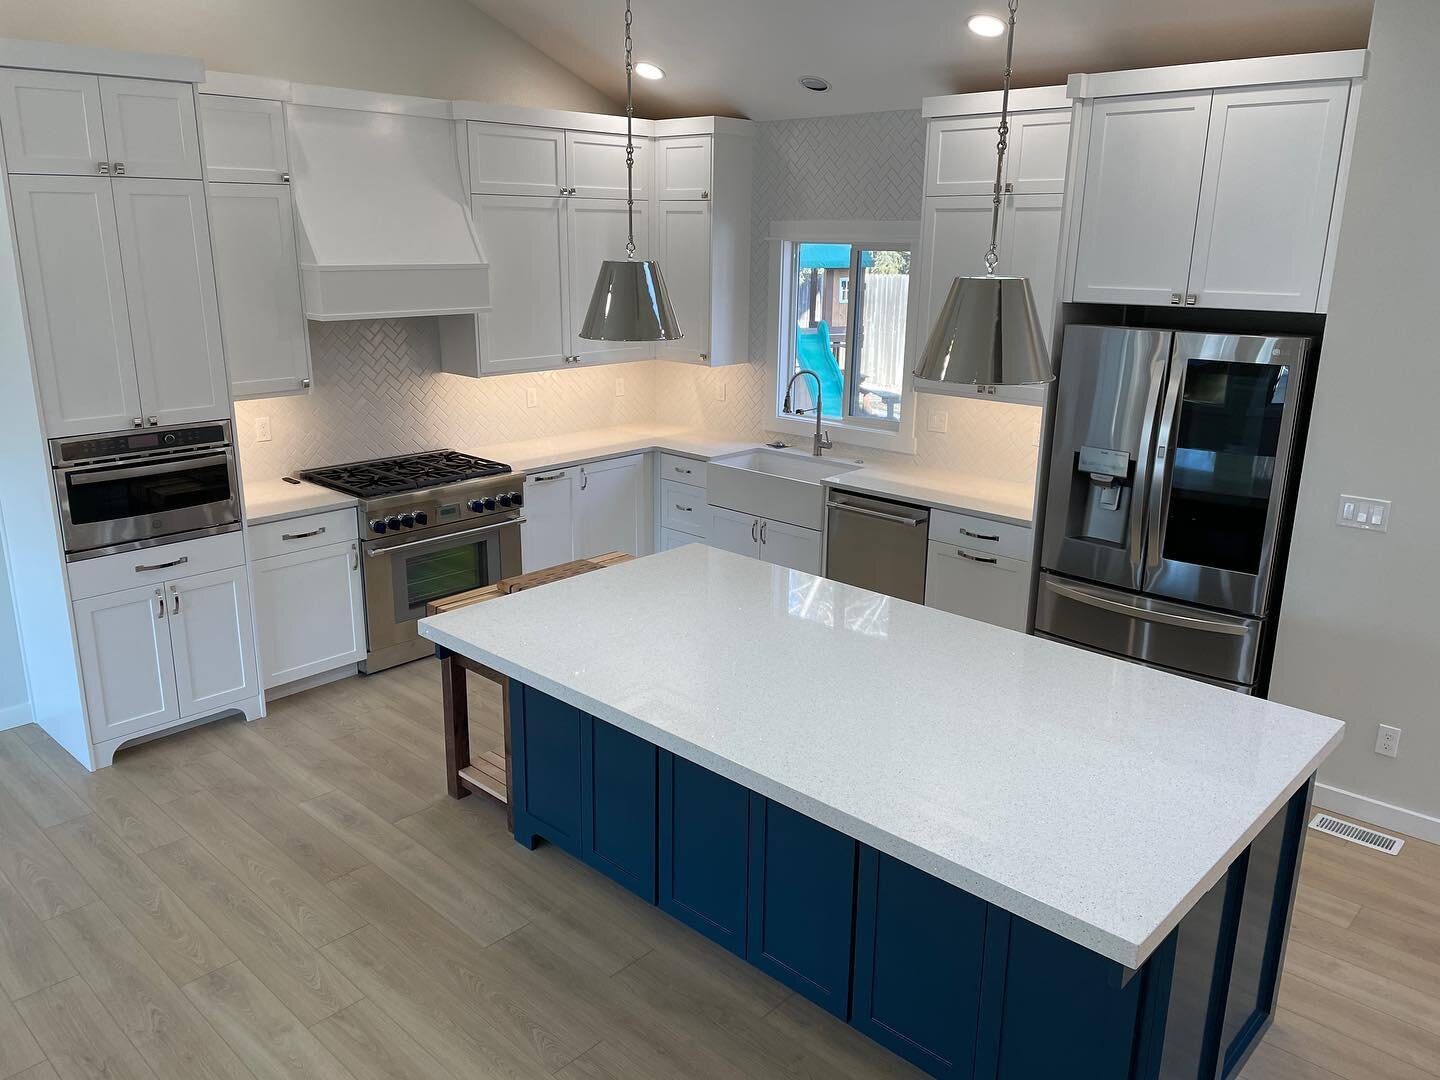 This before and after will blow your mind 🤯

This amazing family wanted to glow-up their family home and boy did that happen! We did a whole home interior remodel of their kitchen, 2 living spaces, laundry and bathrooms.

Keep an eye out for more up